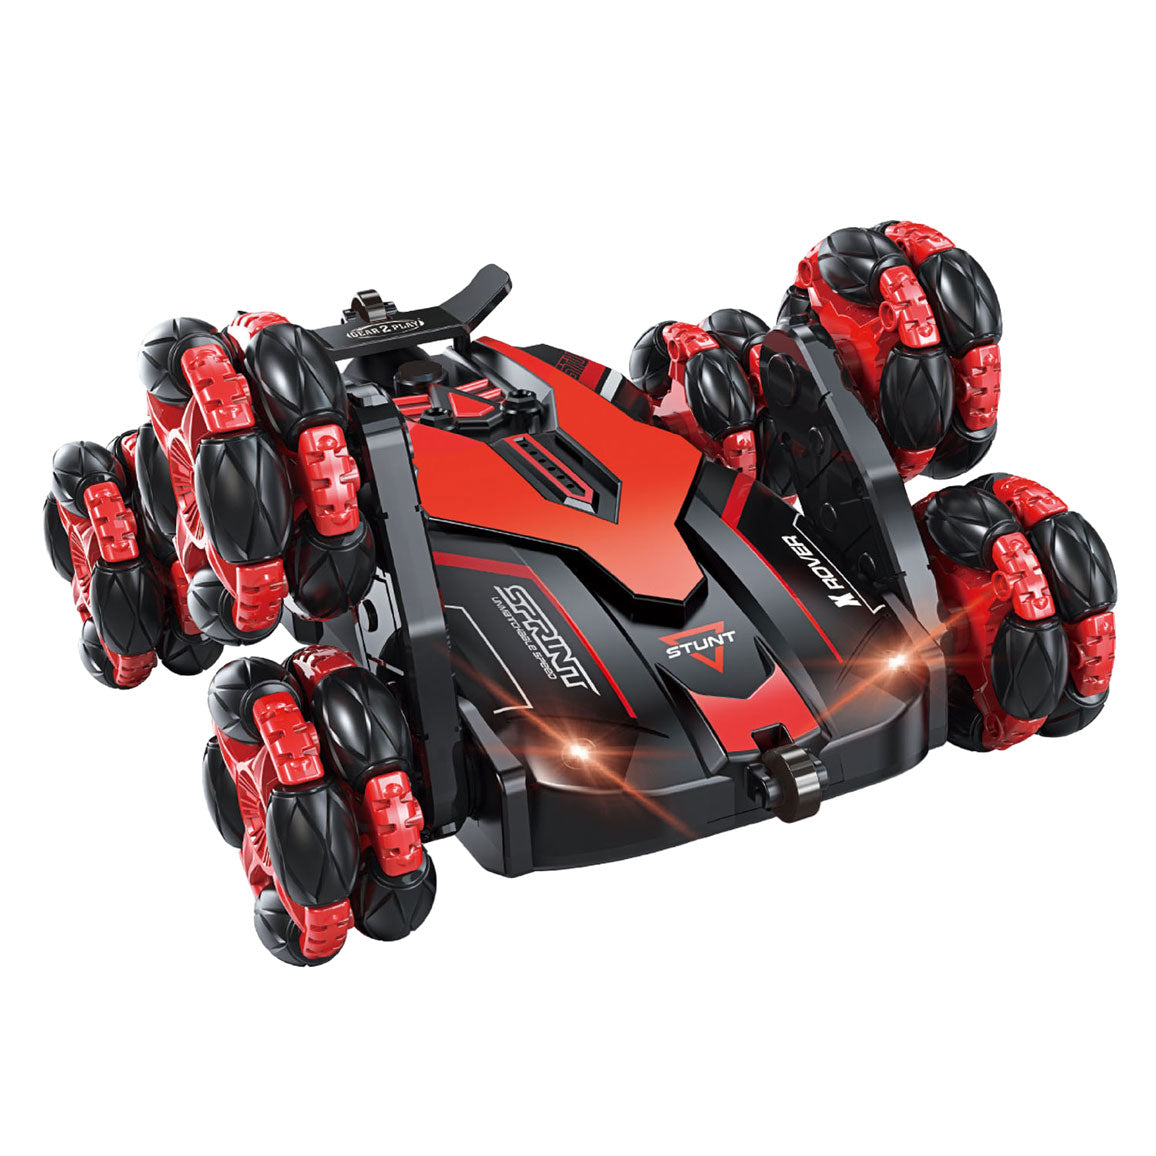 ANSTONIA® Remote Control Laser Car 2.4G with 5-Wheel Marvel Designed for All-Around Stunts, with a Swinging arm, Off-Road Capabilities, and 360-degree Rolling (Blue)